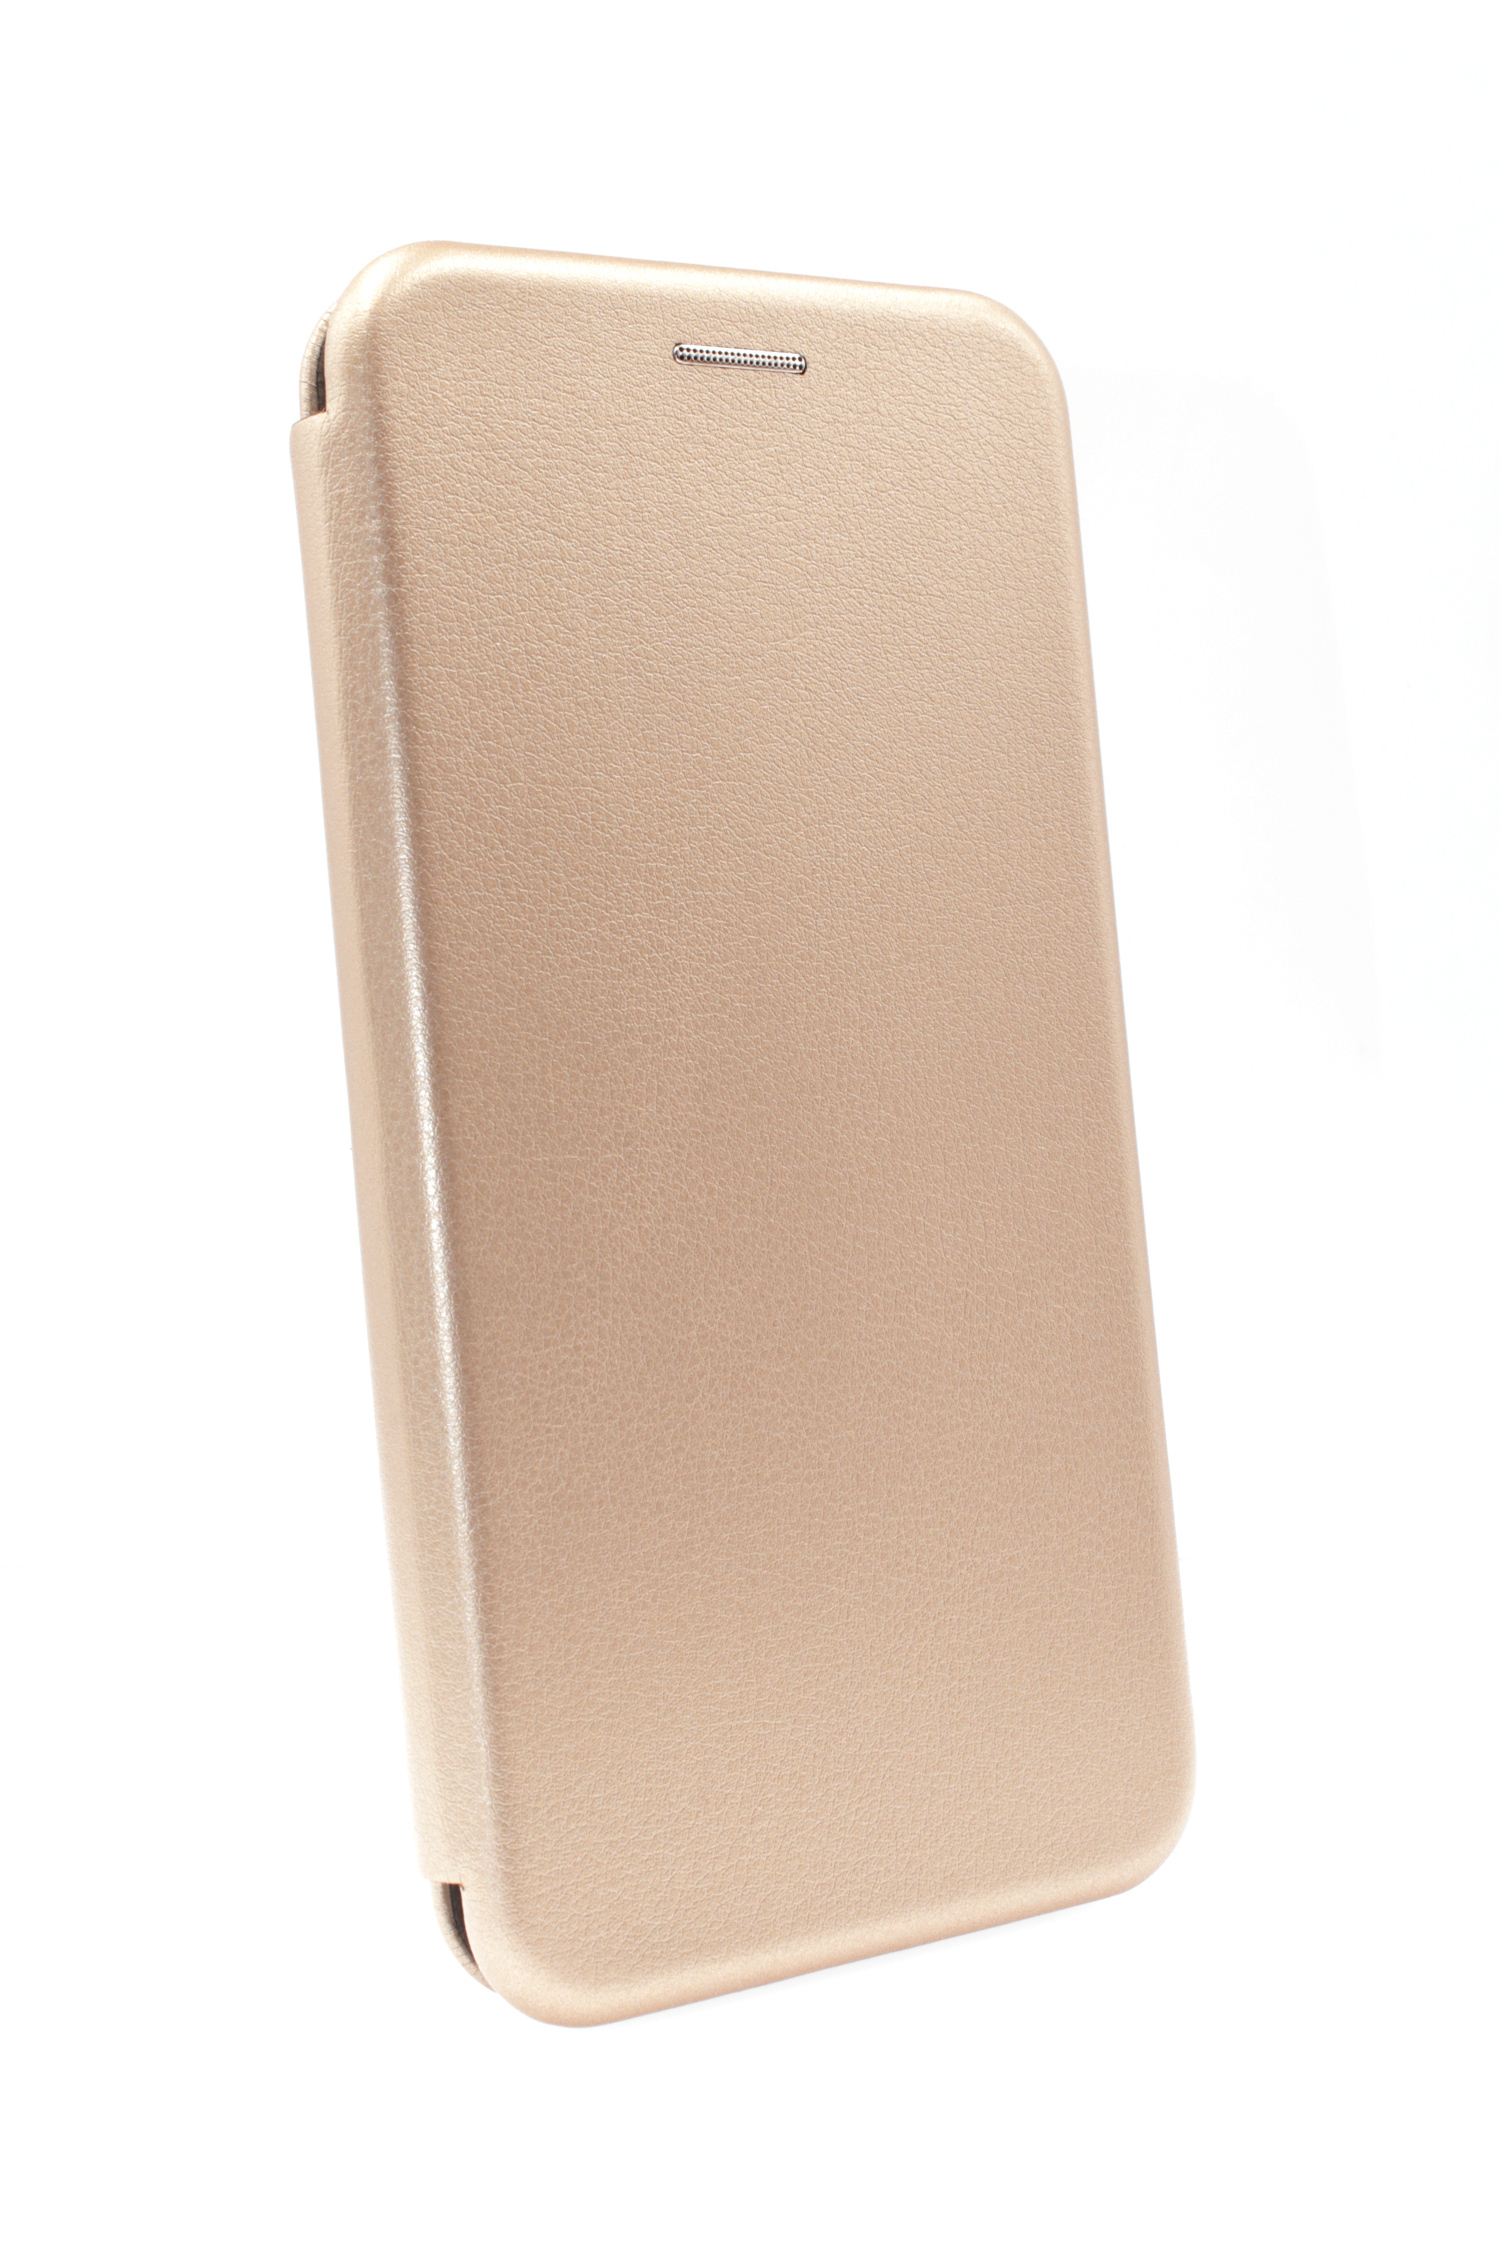 11 Pro, Bookcase JAMCOVER Apple, Gold iPhone Bookcover, Rounded,